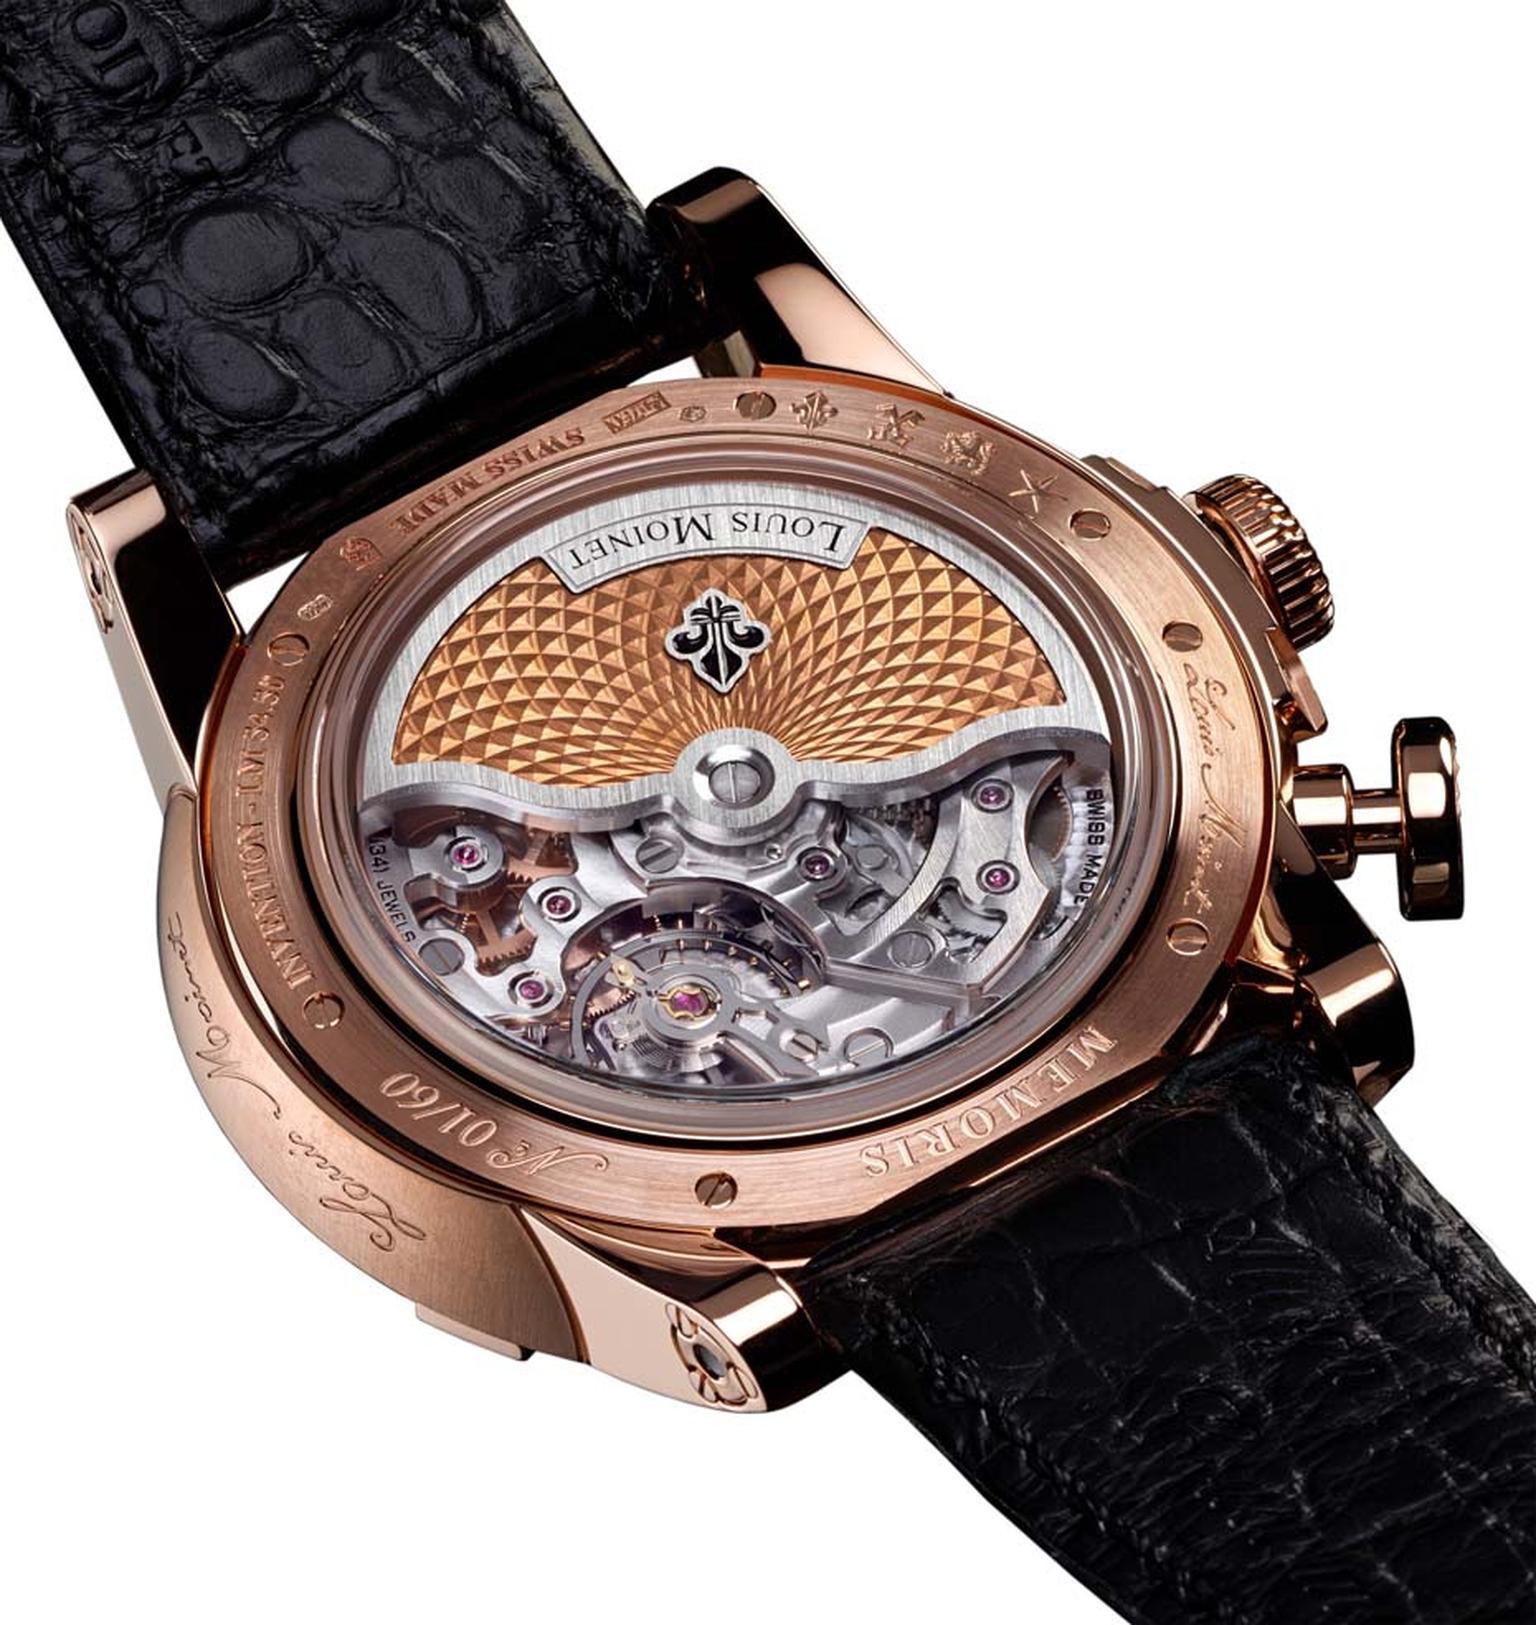 Louis Moinet's Memoris chronograph comes in a 46mm rose or white gold case, is a limited edition of 60 pieces and displays the entire mono-pusher chronograph movement on the dial. On the back of the case, the richly decorated rotor reveals some of the 302